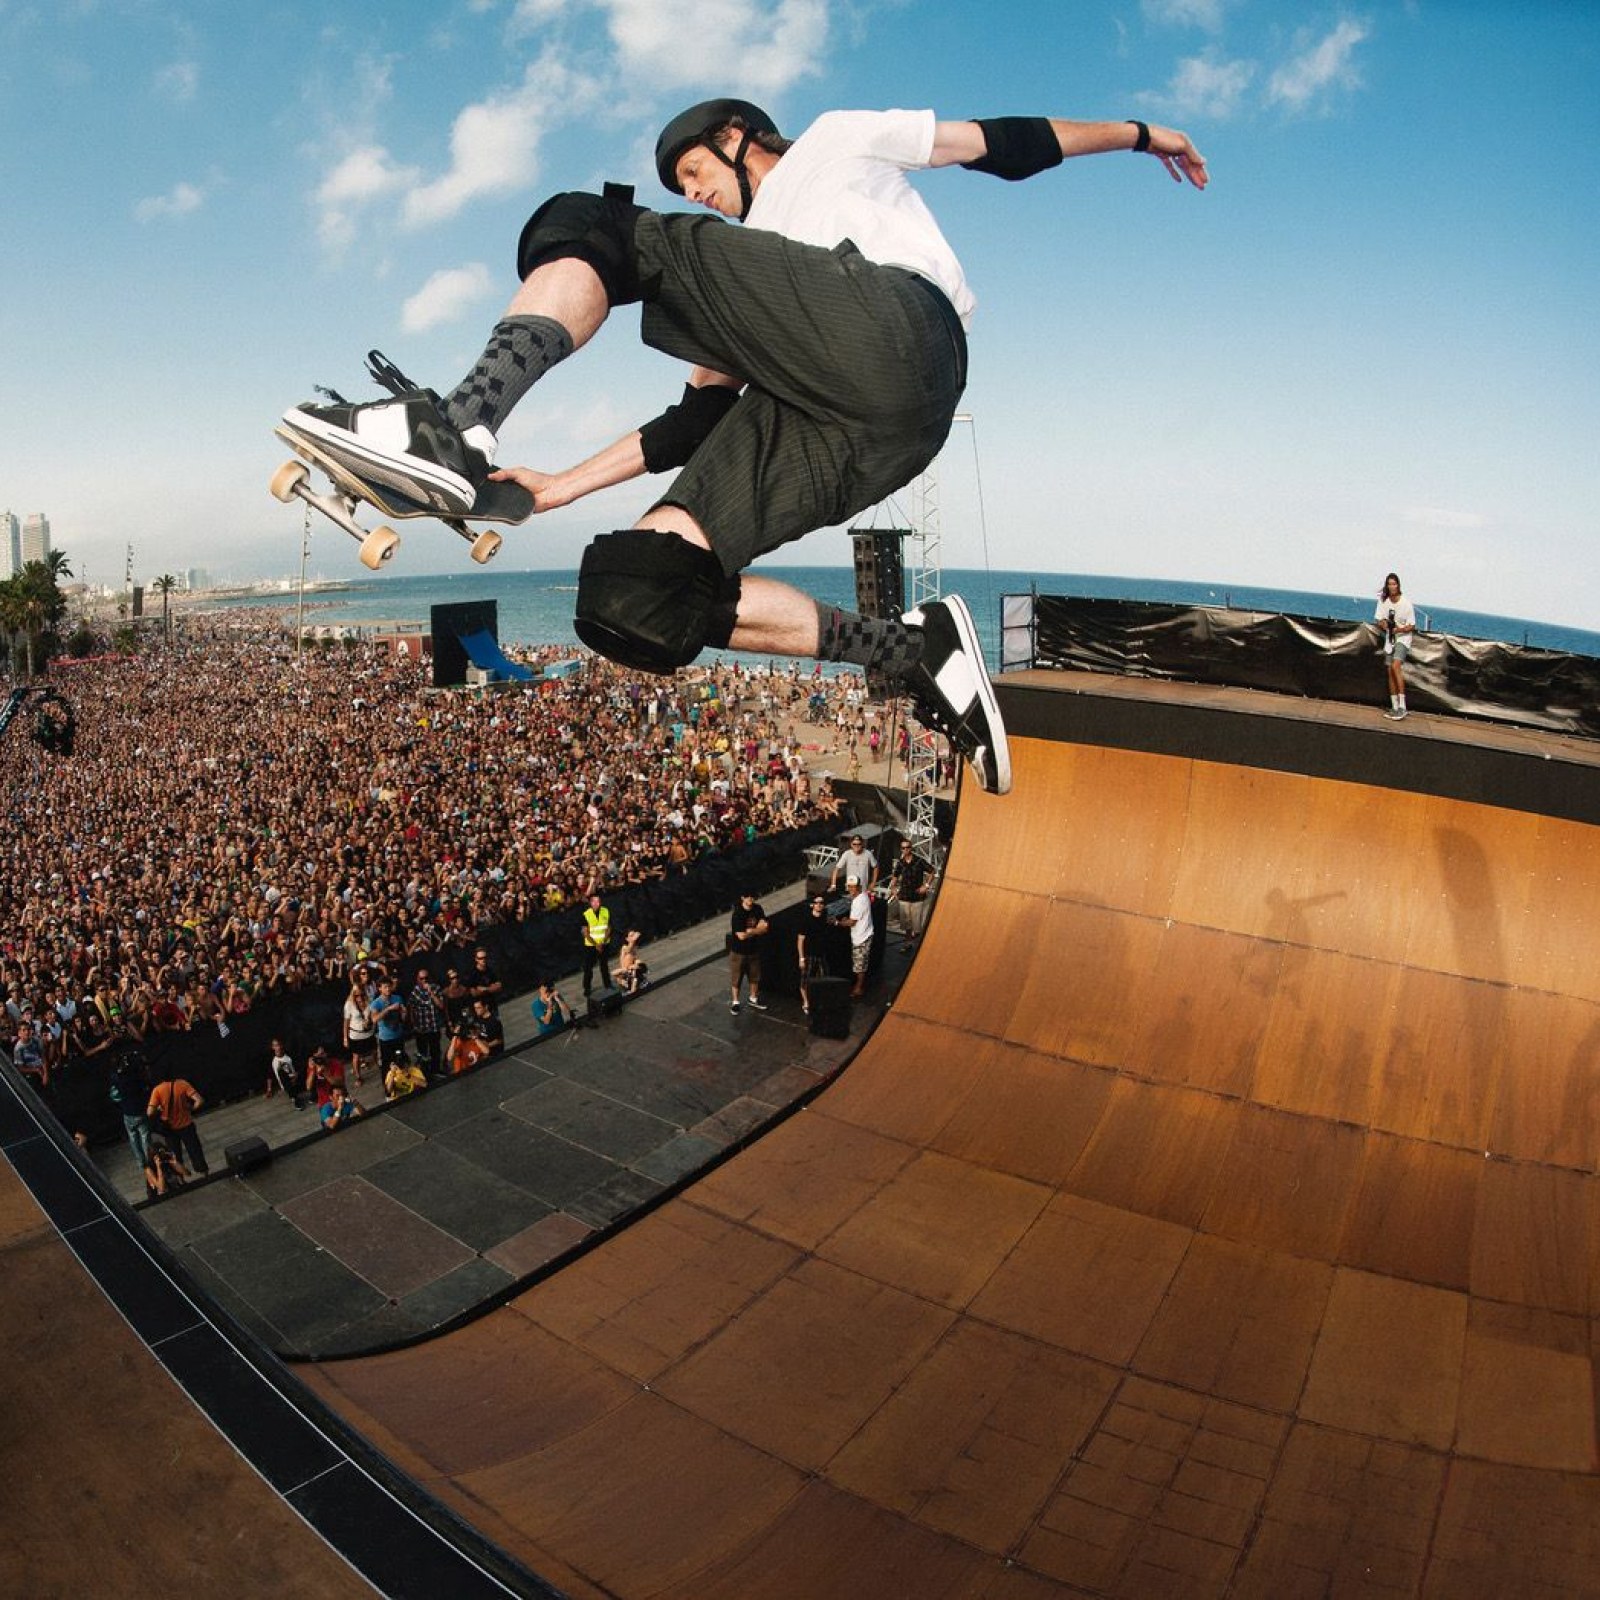 Minachting Vul in zand Tony Hawk at 50: Skateboarding Legend Talks Career, Fame and 'The Simpsons'